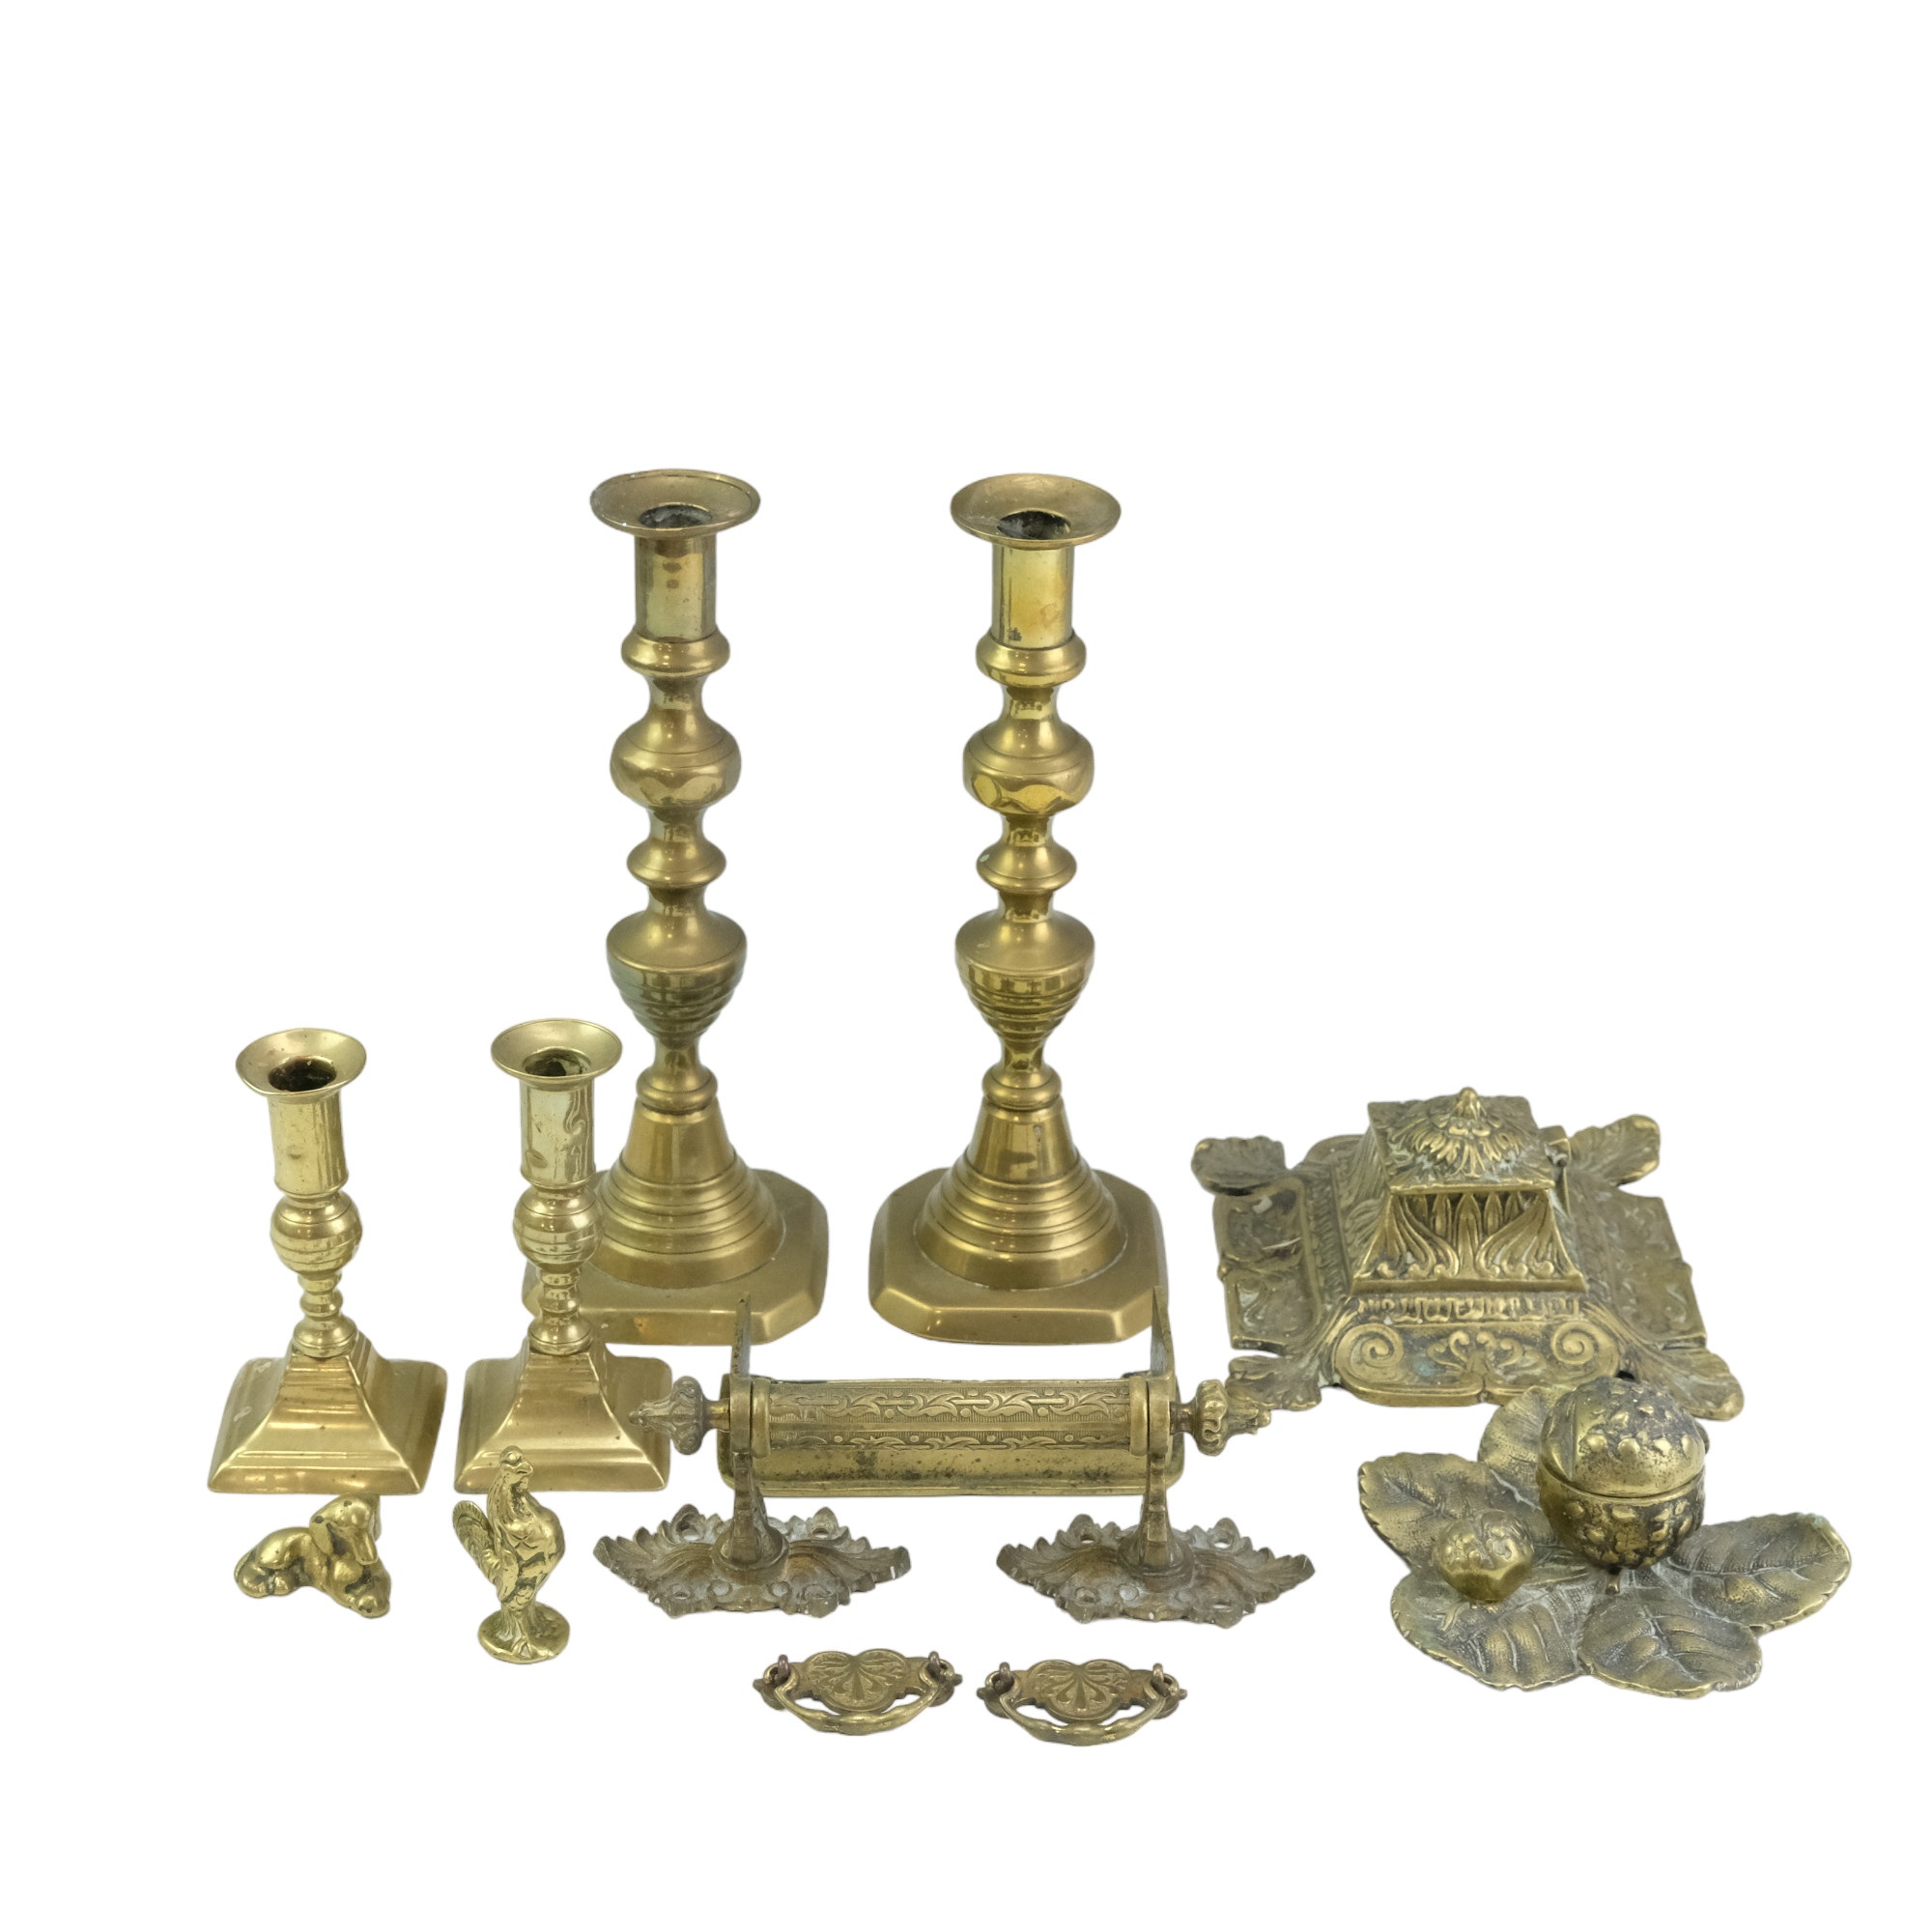 A quantity of Victorian and later domestic brassware including two pairs of candlesticks, two